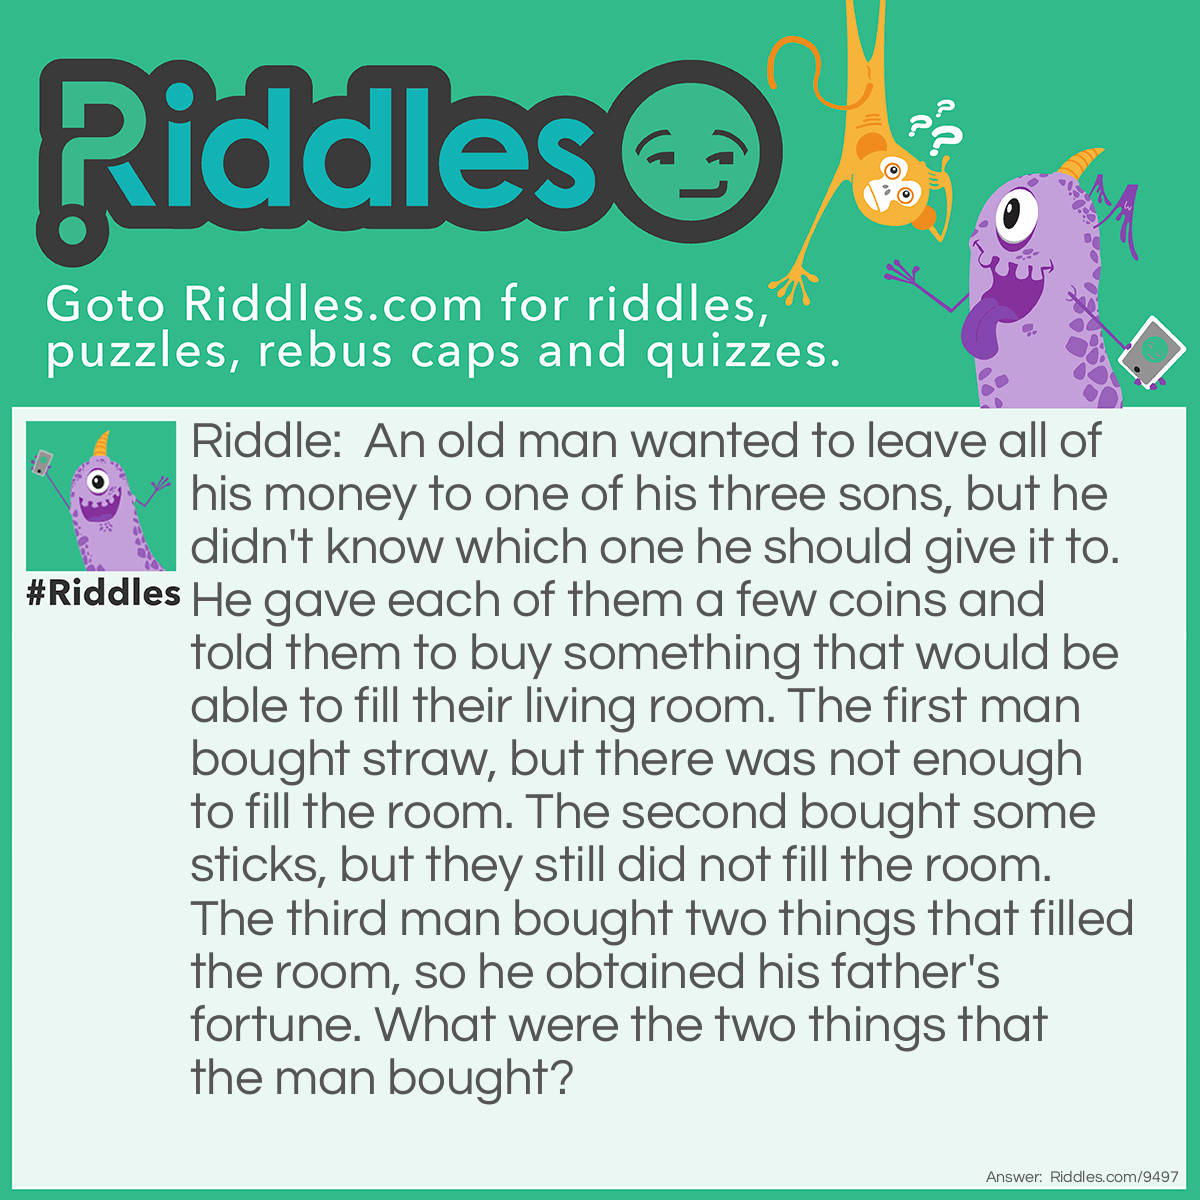 Riddle: An old man wanted to leave all of his money to one of his three sons, but he didn't know which one he should give it to. He gave each of them a few coins and told them to buy something that would be able to fill their living room. The first man bought straw, but there was not enough to fill the room. The second bought some sticks, but they still did not fill the room. The third man bought two things that filled the room, so he obtained his father's fortune. What were the two things that the man bought? Answer: The wise son bought a candle and a box of matches. After lighting the candle, the light filled the entire room.